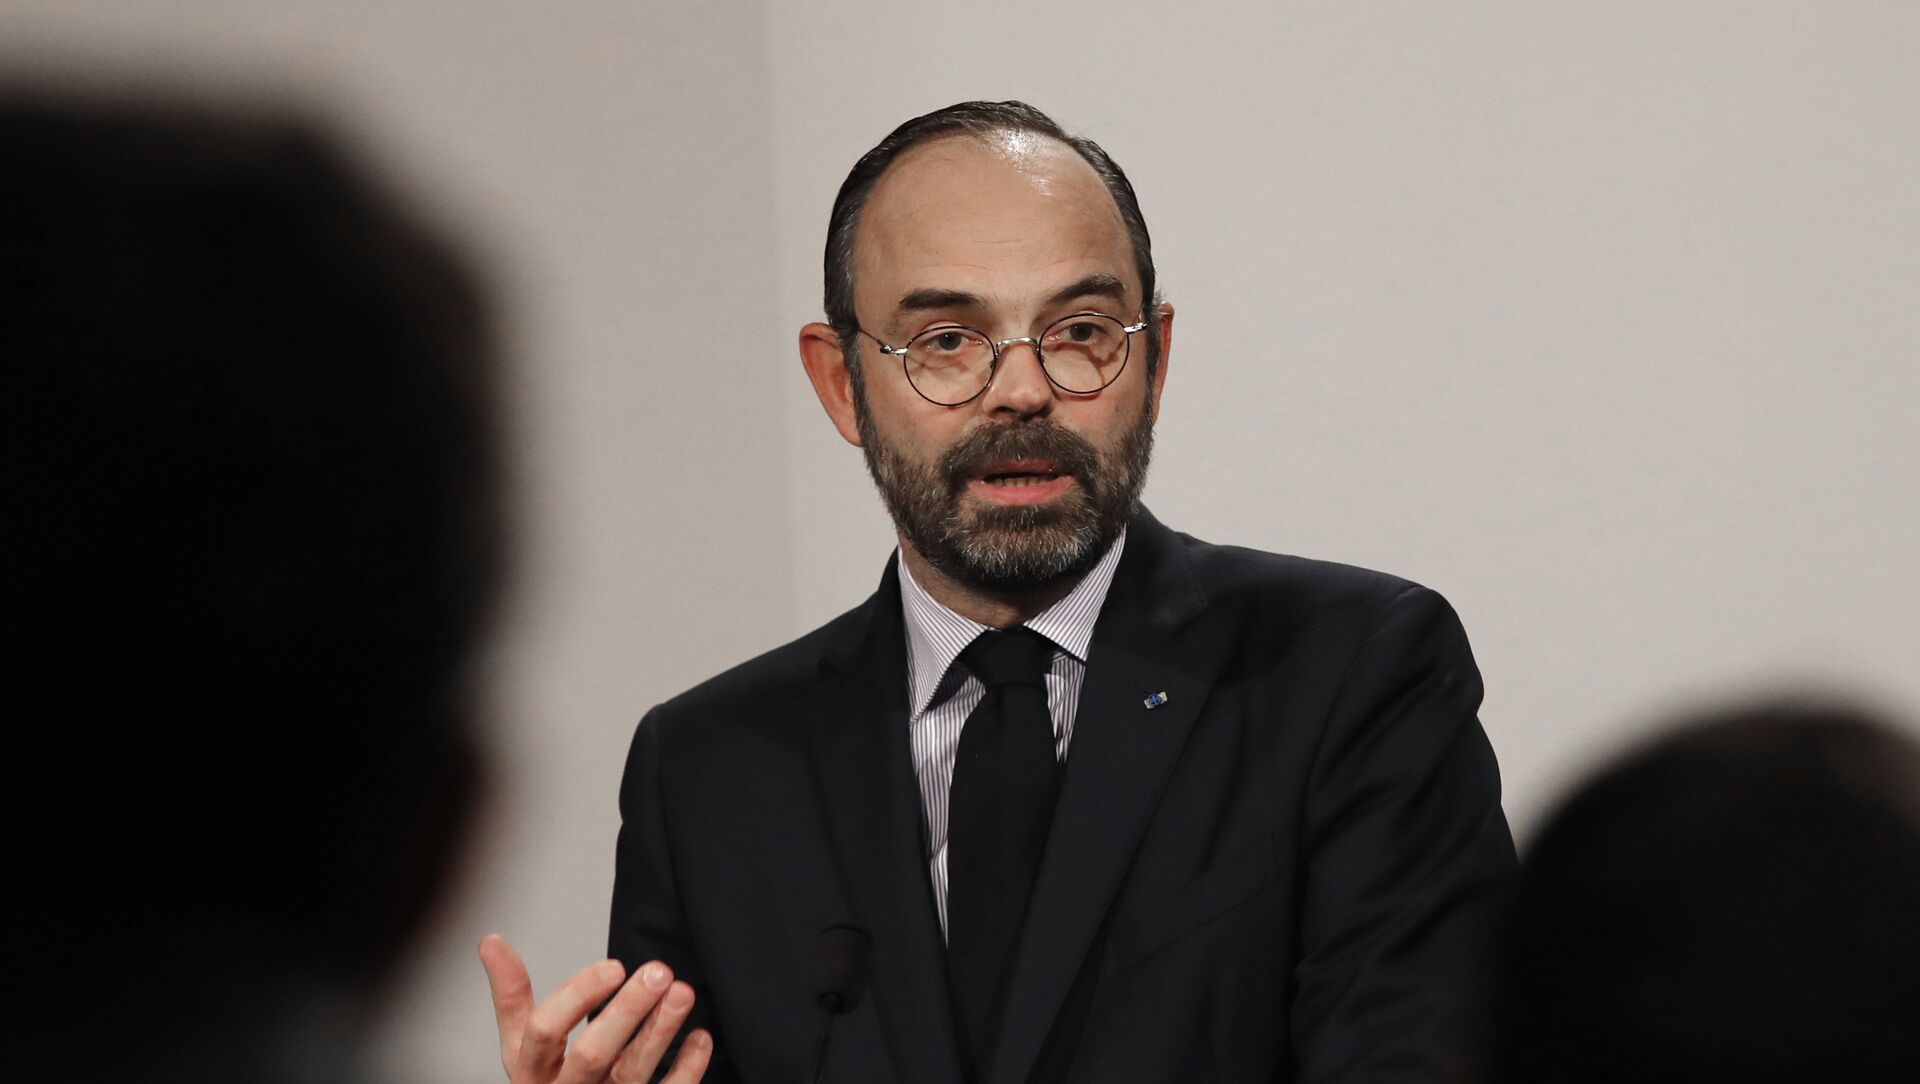 French Prime Minister Edouard Philippe delivers his speech during a press conference in Paris, Wednesday, Jan. 9, 2019. - Sputnik Afrique, 1920, 11.03.2021